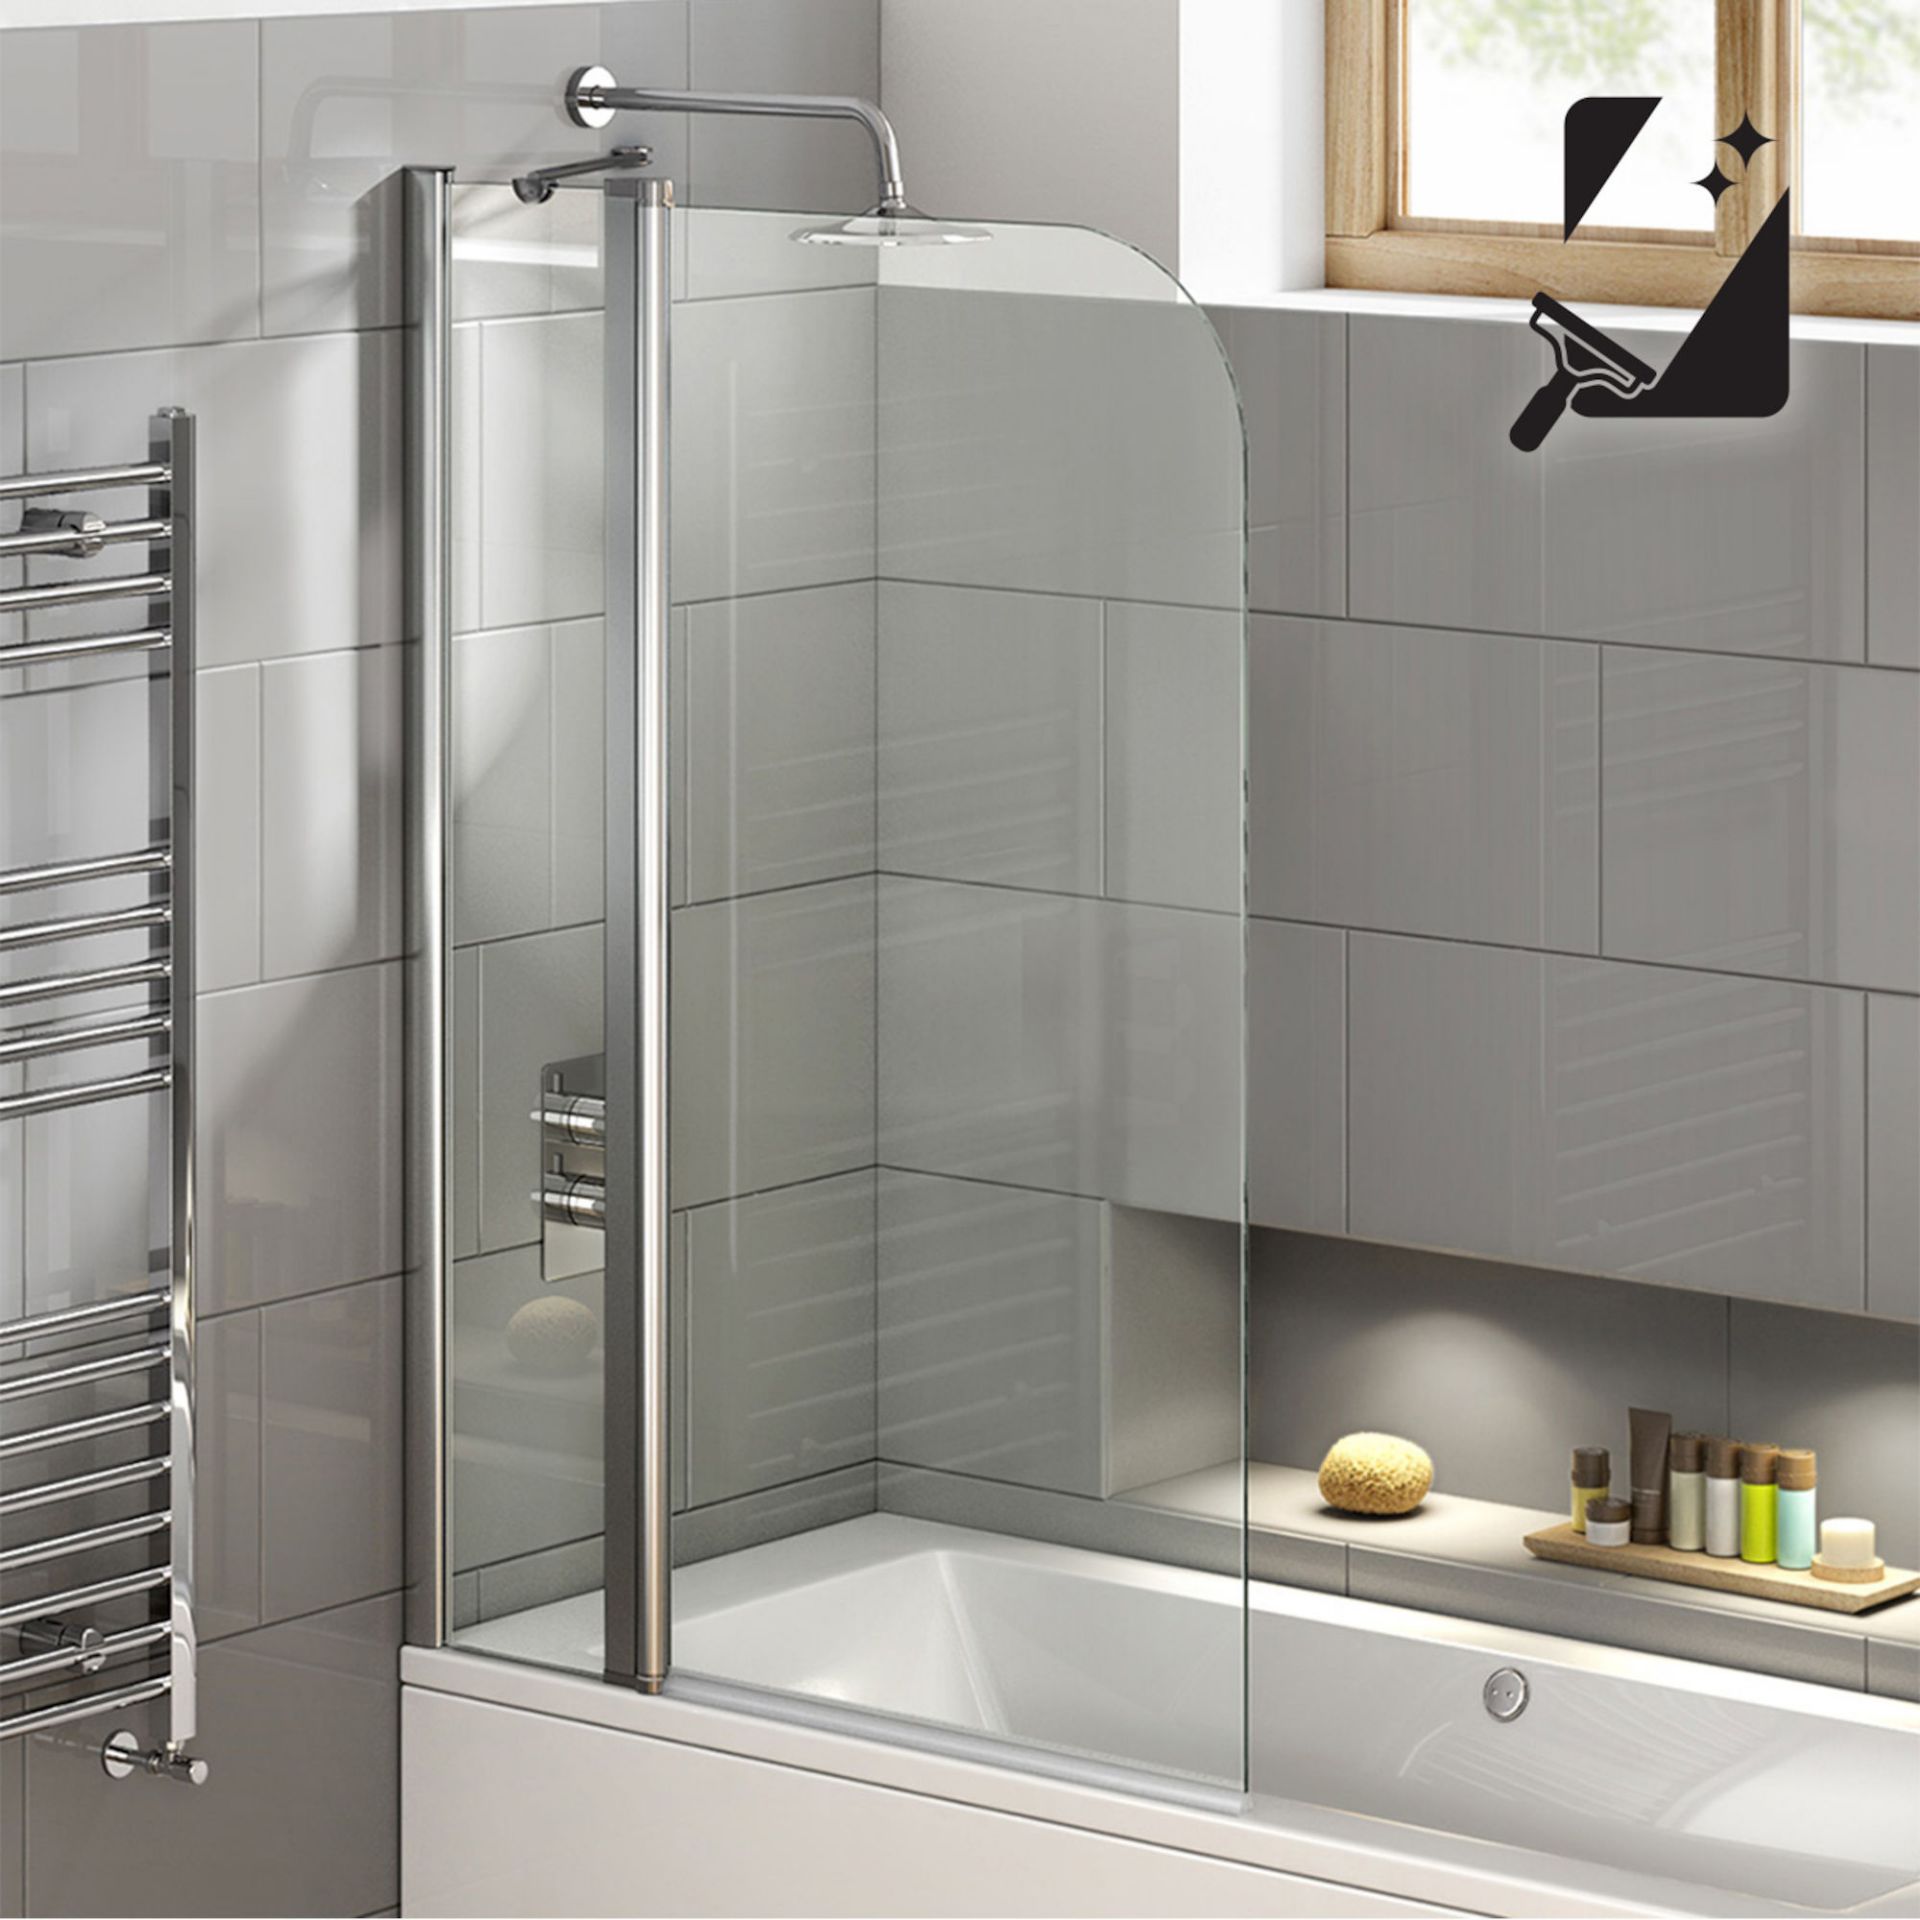 (DK44) 1000mm - 6mm - EasyClean Straight Bath Screen. RRP £224.99. 6mm Tempered Safety Glass